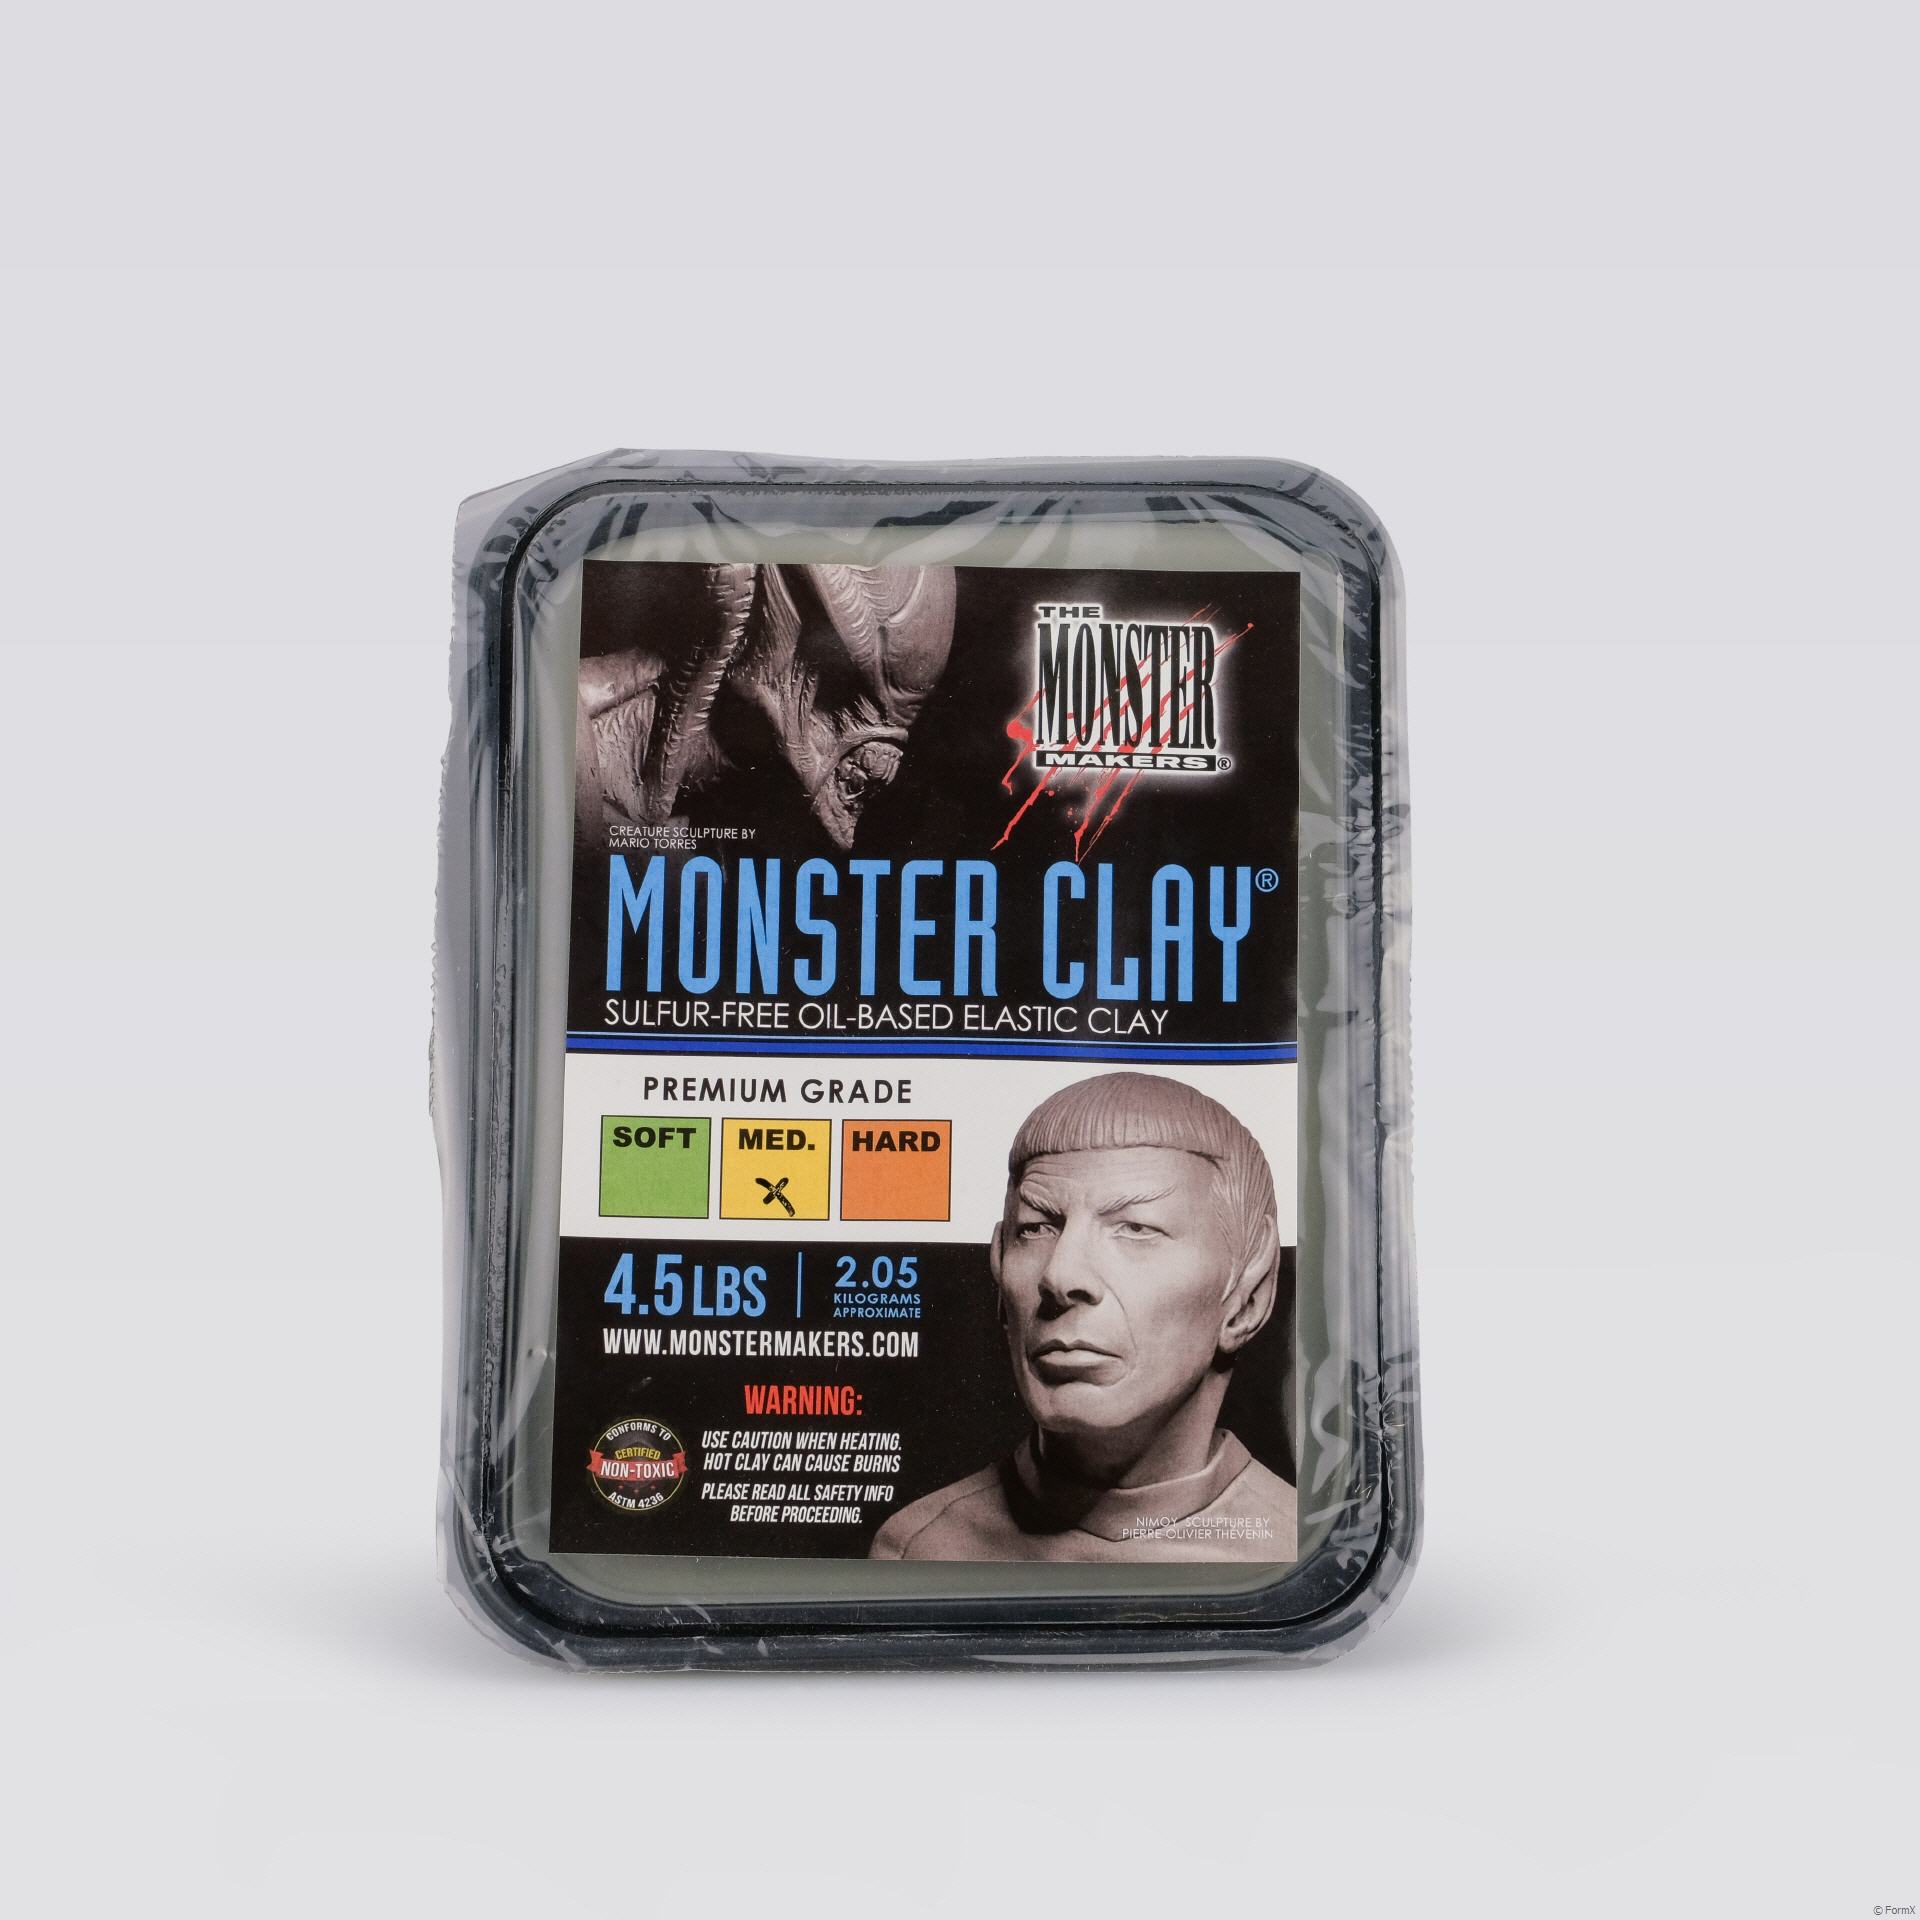 Monster Clay by Monster Makers